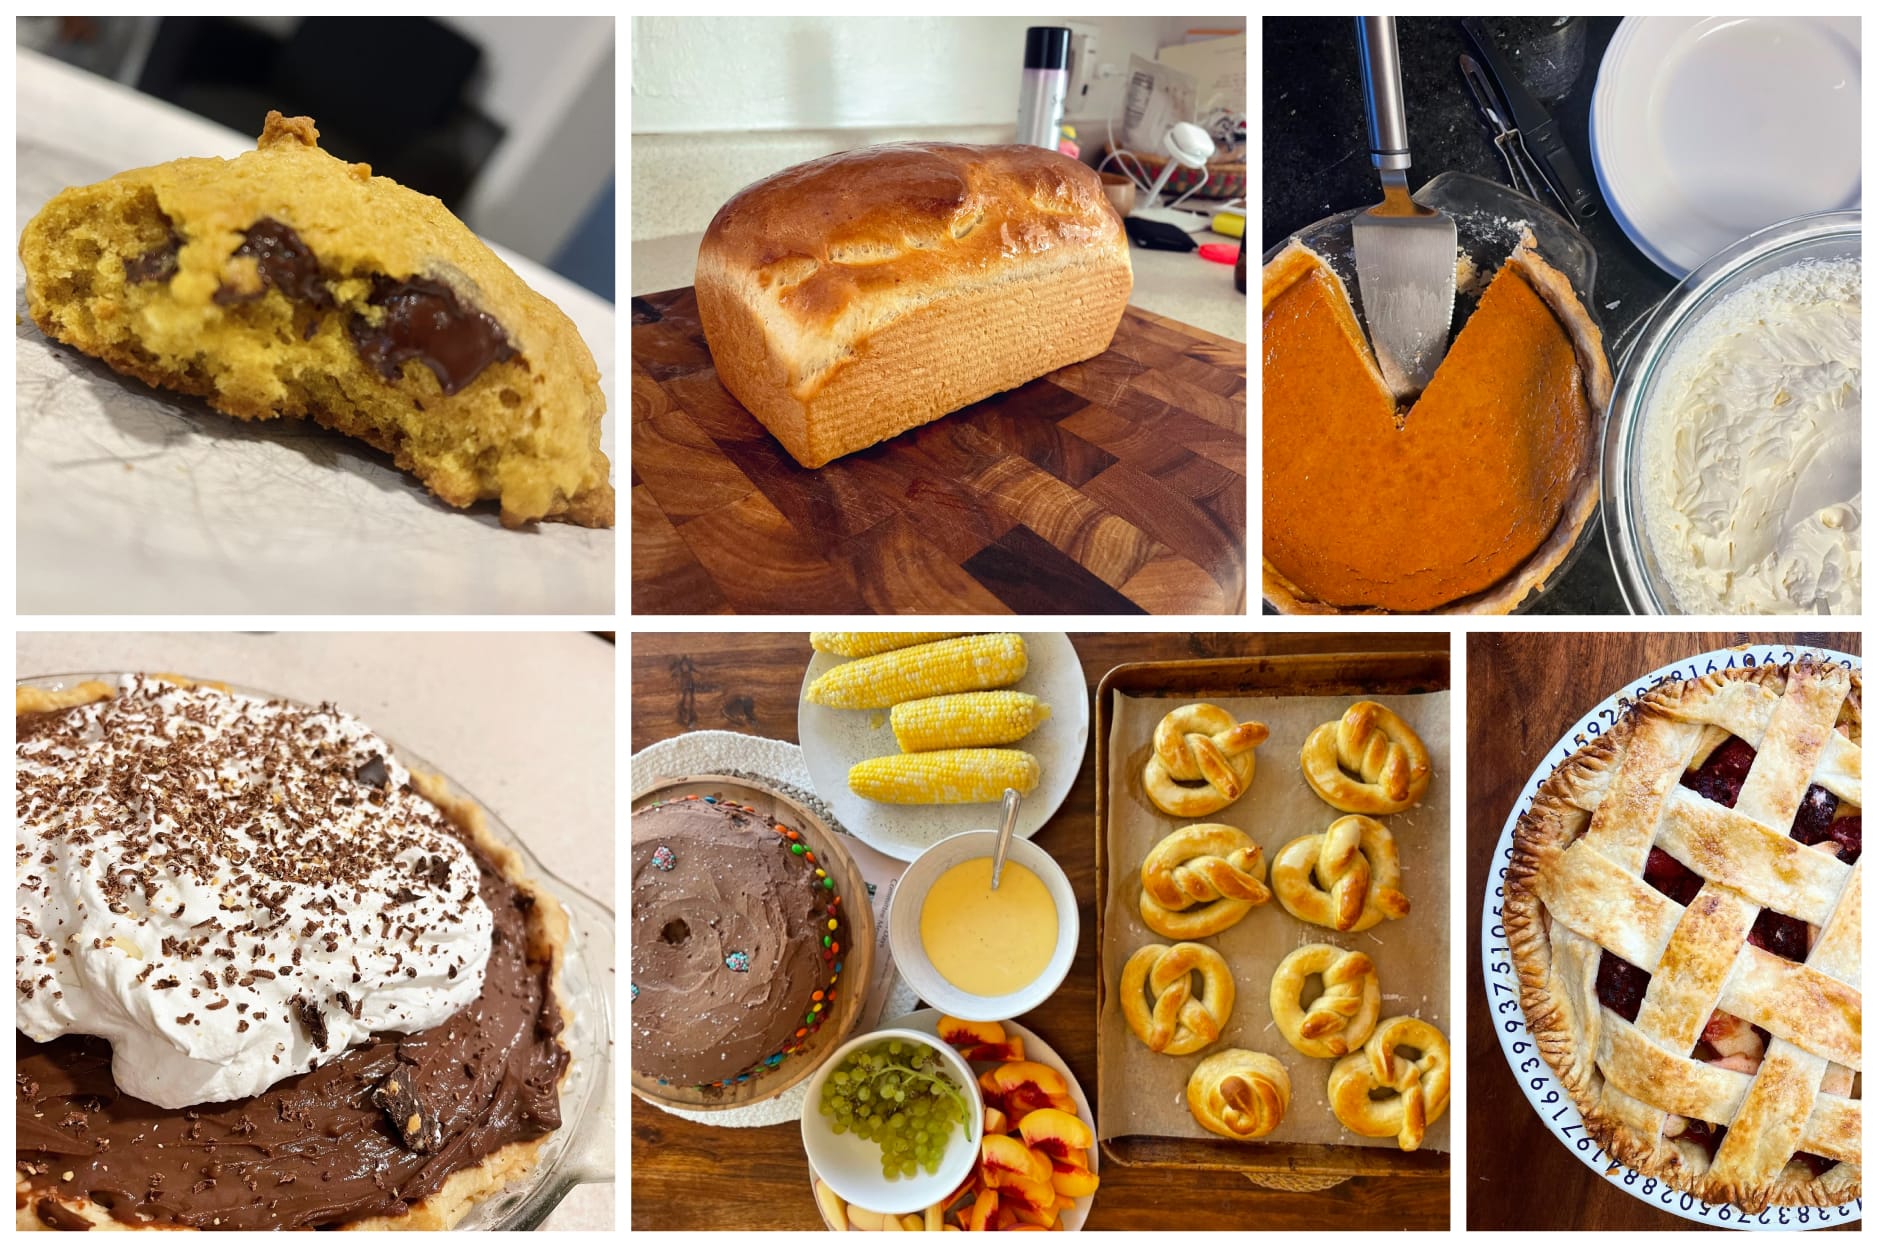 Photograph collage of various baked goods, including pumpkin cookies, white bread, pumpkin pie with whipped cream, chocolate cream pie, pretezels, cake, and apple berry pie.